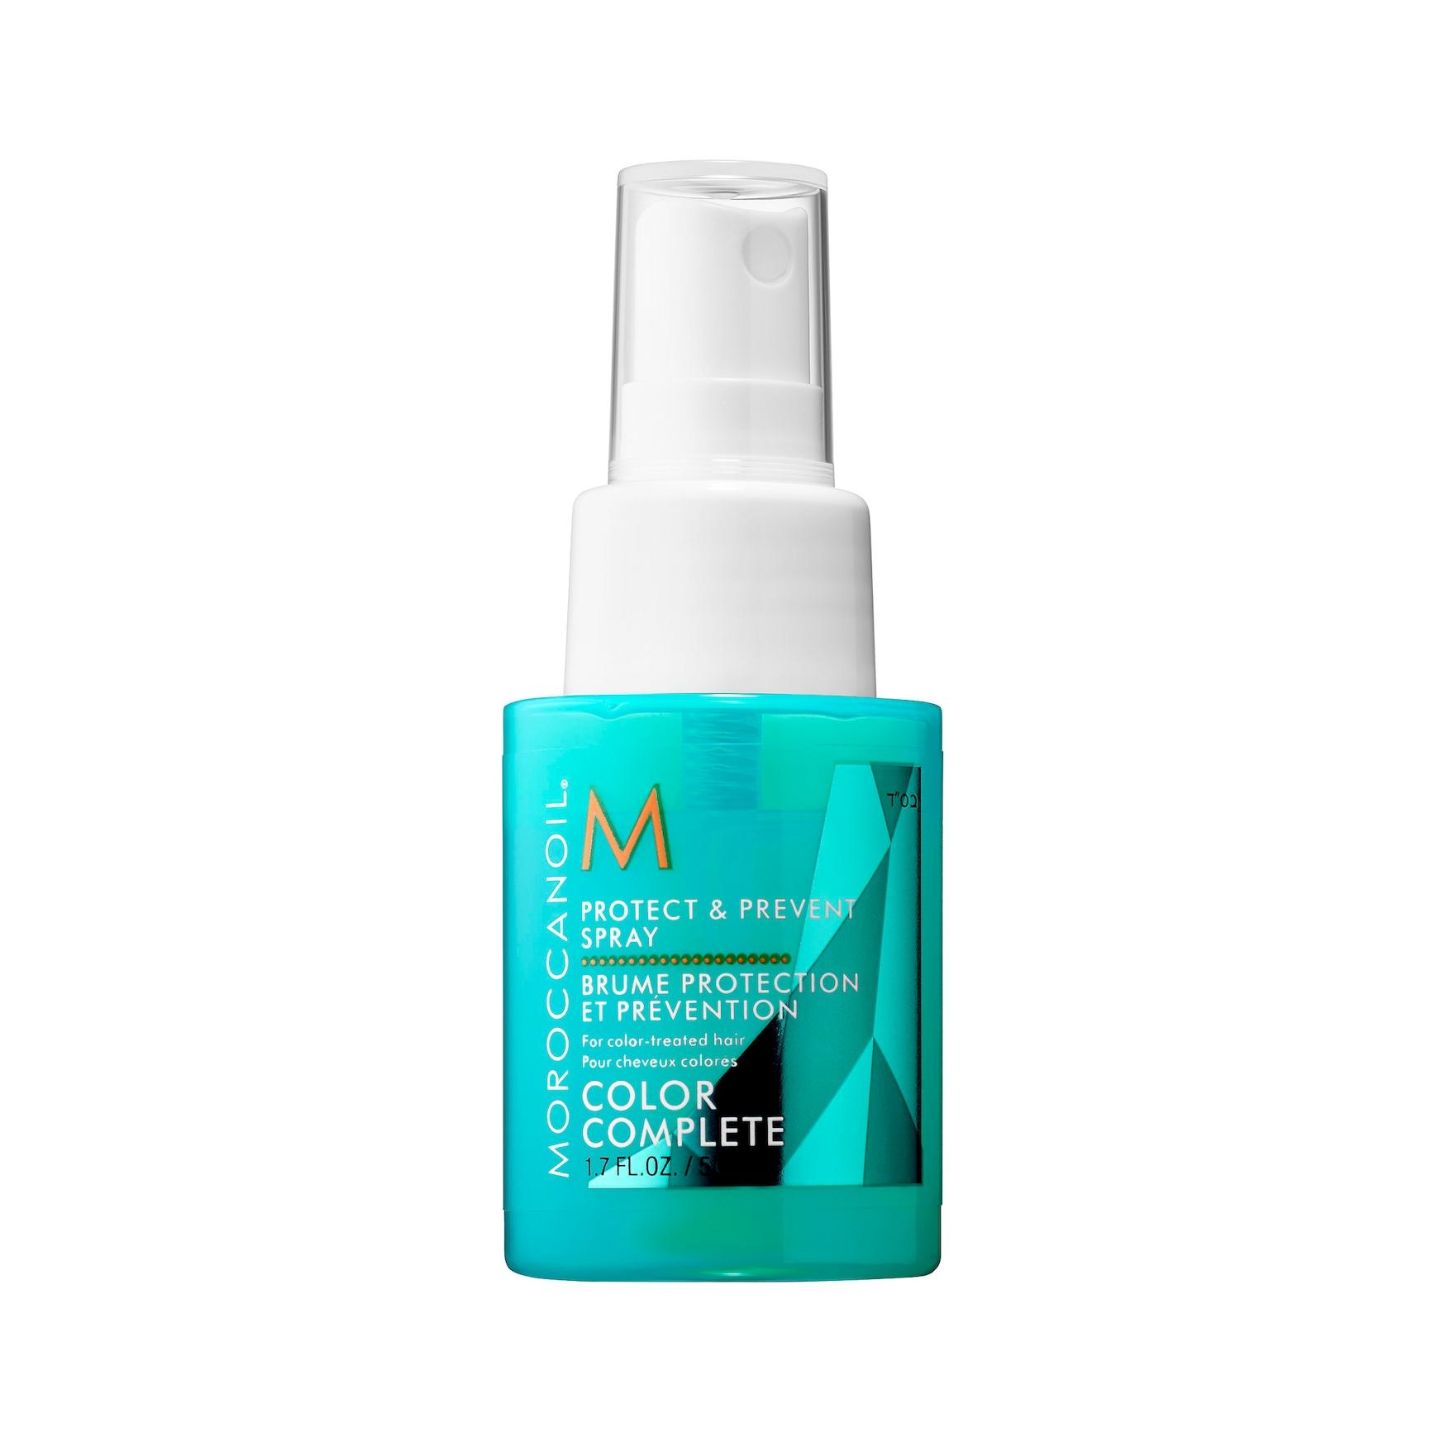 Spritz this one on your hair before and after a day at the beach to keep it feeling soft and silky. Moroccan Oil Protect and Prevent Spray, $16 for 50ml, moroccanoil.com